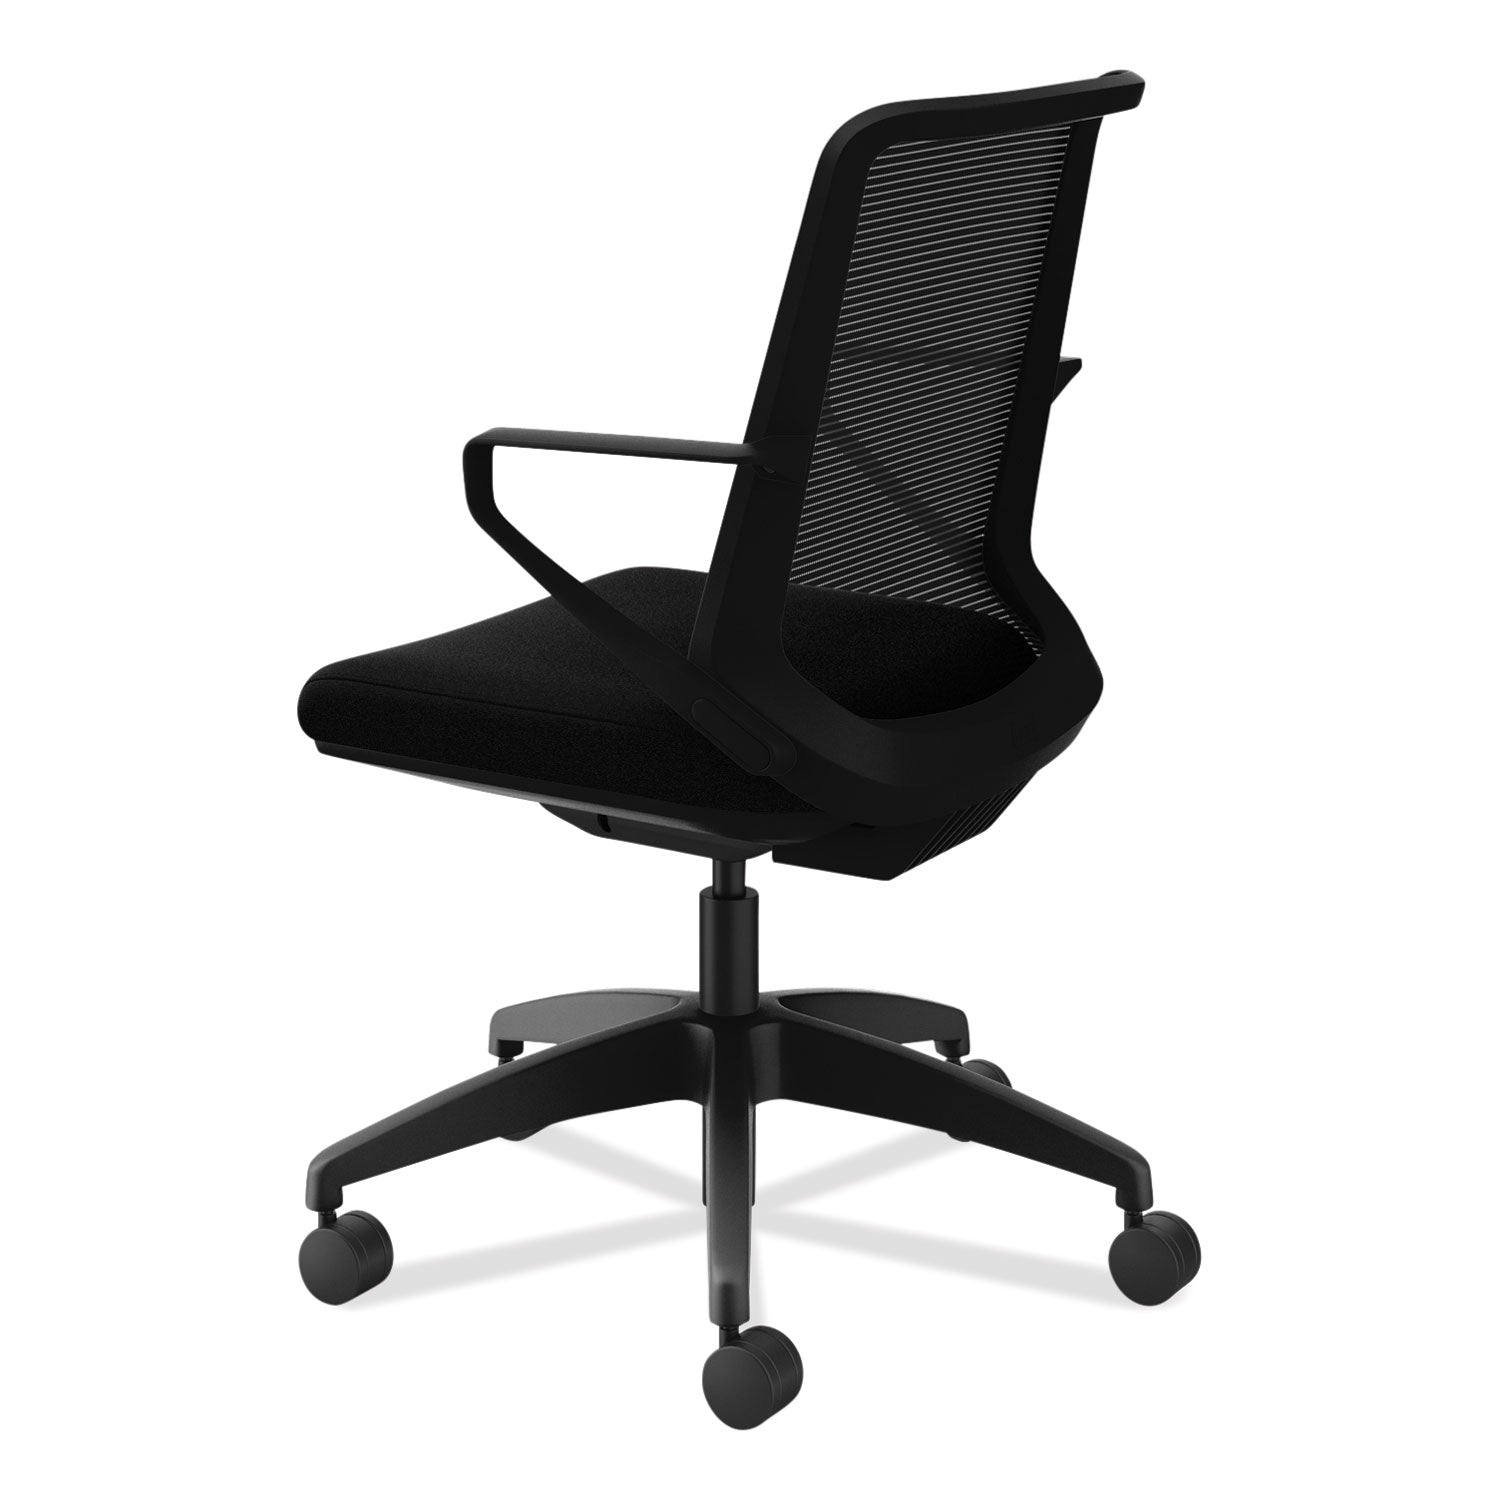 cliq-office-chair-supports-up-to-300-lb-17-to-22-seat-height-black-seat-back-black-base-ships-in-7-10-business-days_honclqimcu10t - 6